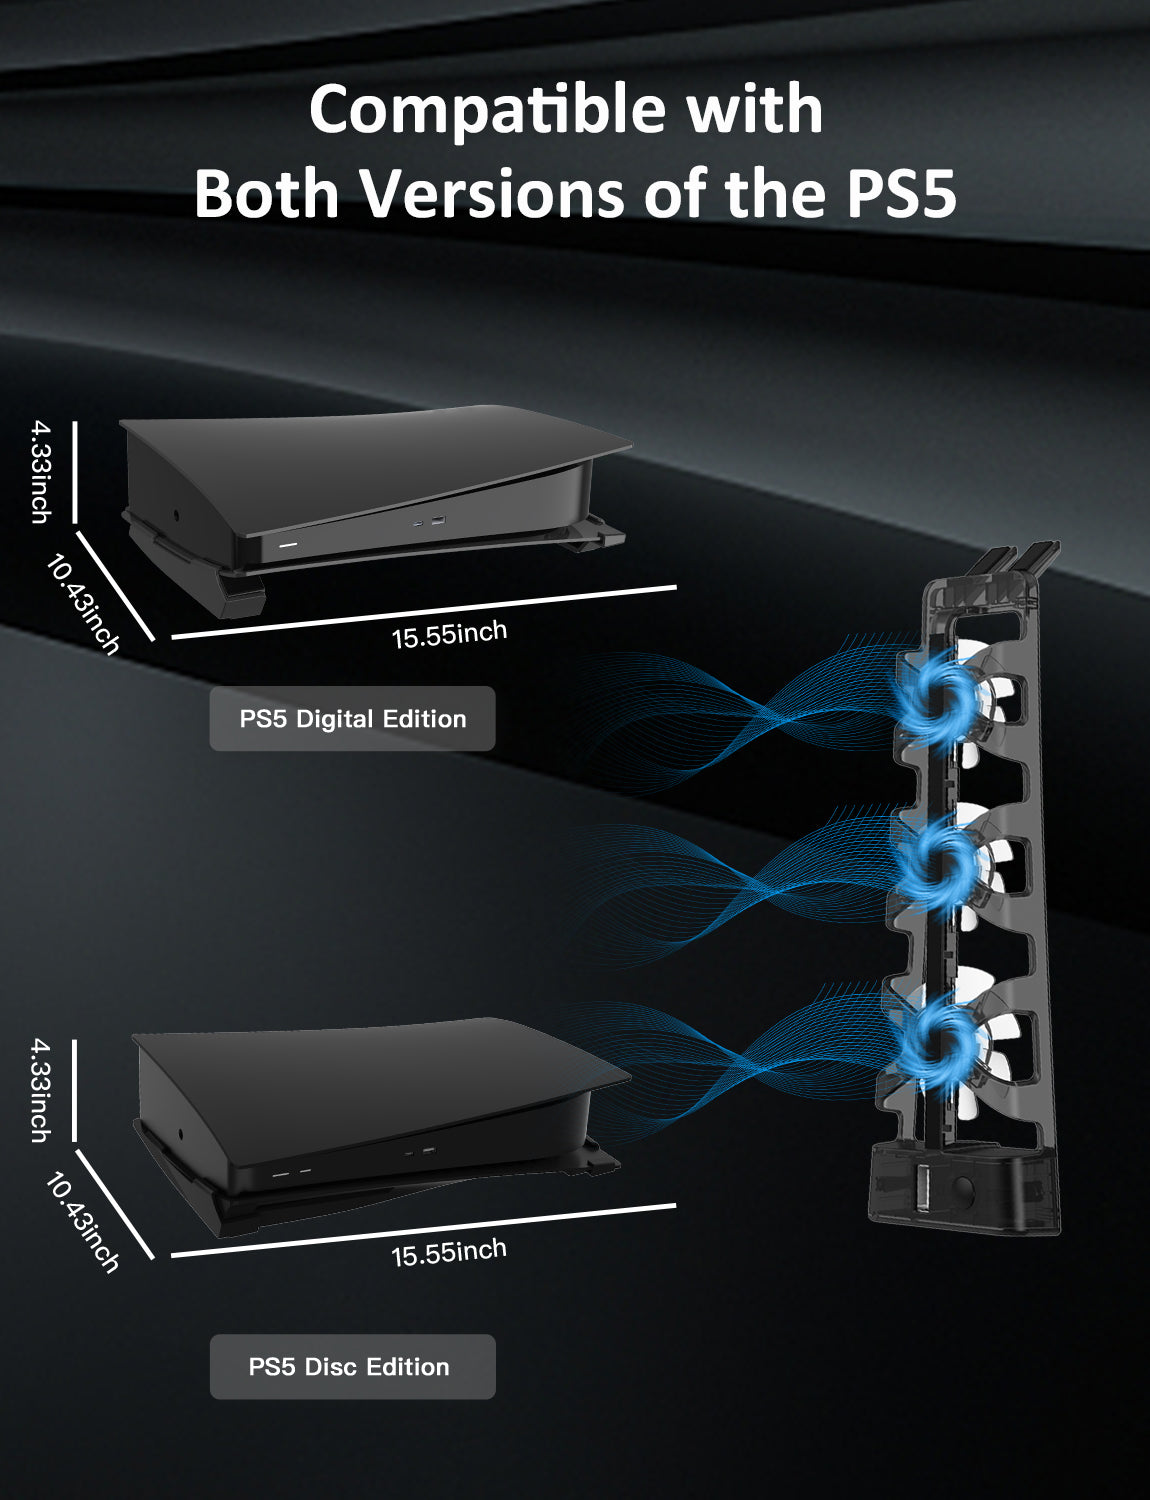 The cooling fan and vertical stand are compatible with both PS5 Digital Edition and Disc Edition.